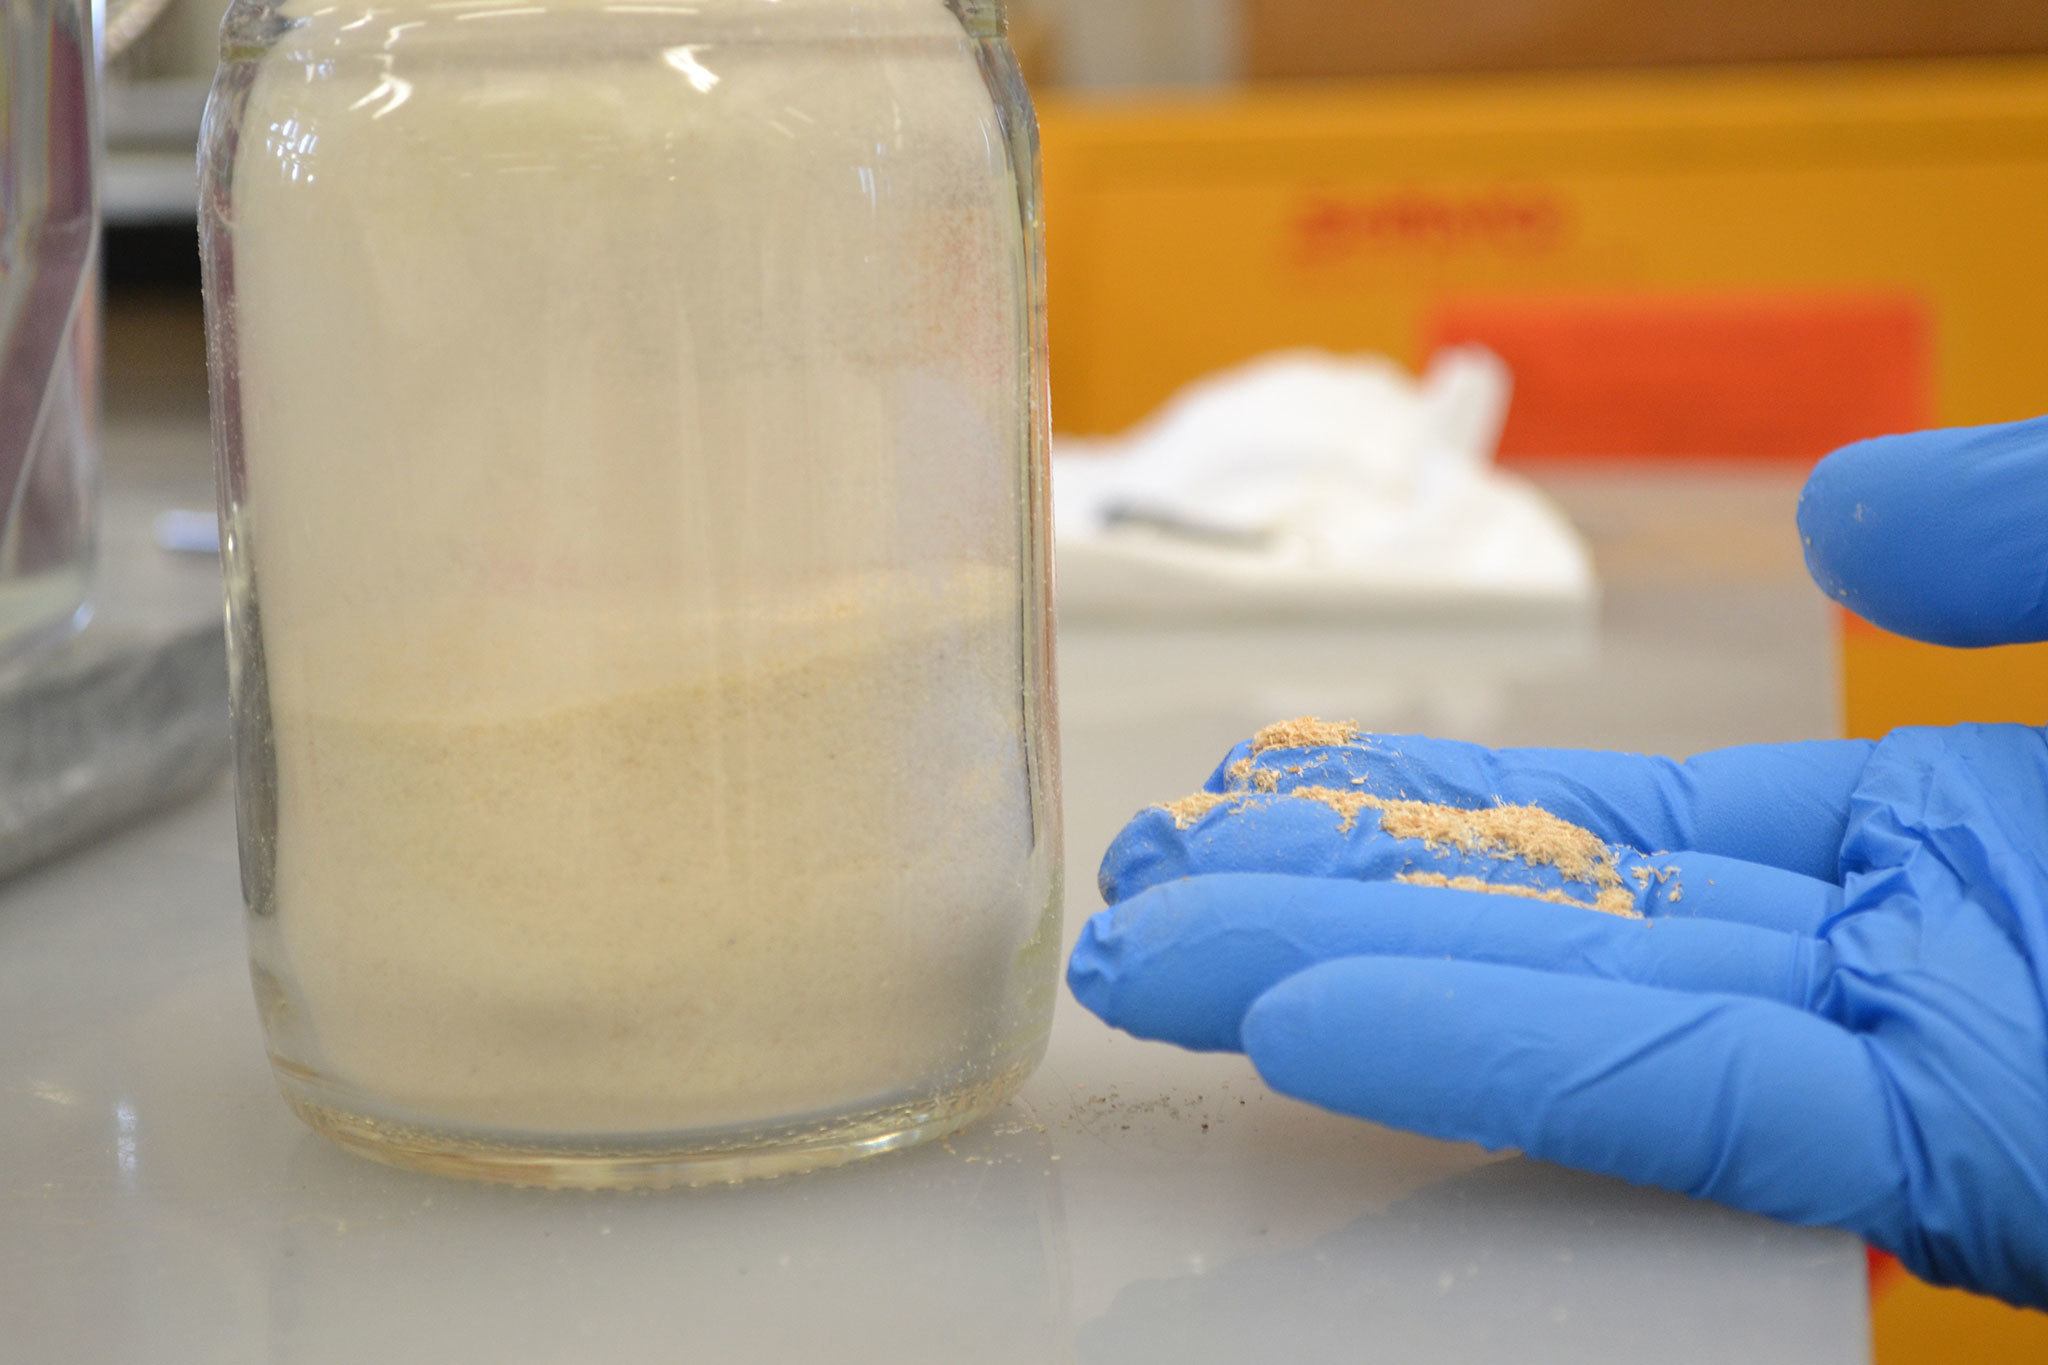 This wood flour is fine dust from wood processing that chemists modified to attract oil, repel water and prevent freezing so it can more effectively help burn oil in icy conditions. (Matthew Nash/Olympic Peninsula News Group)